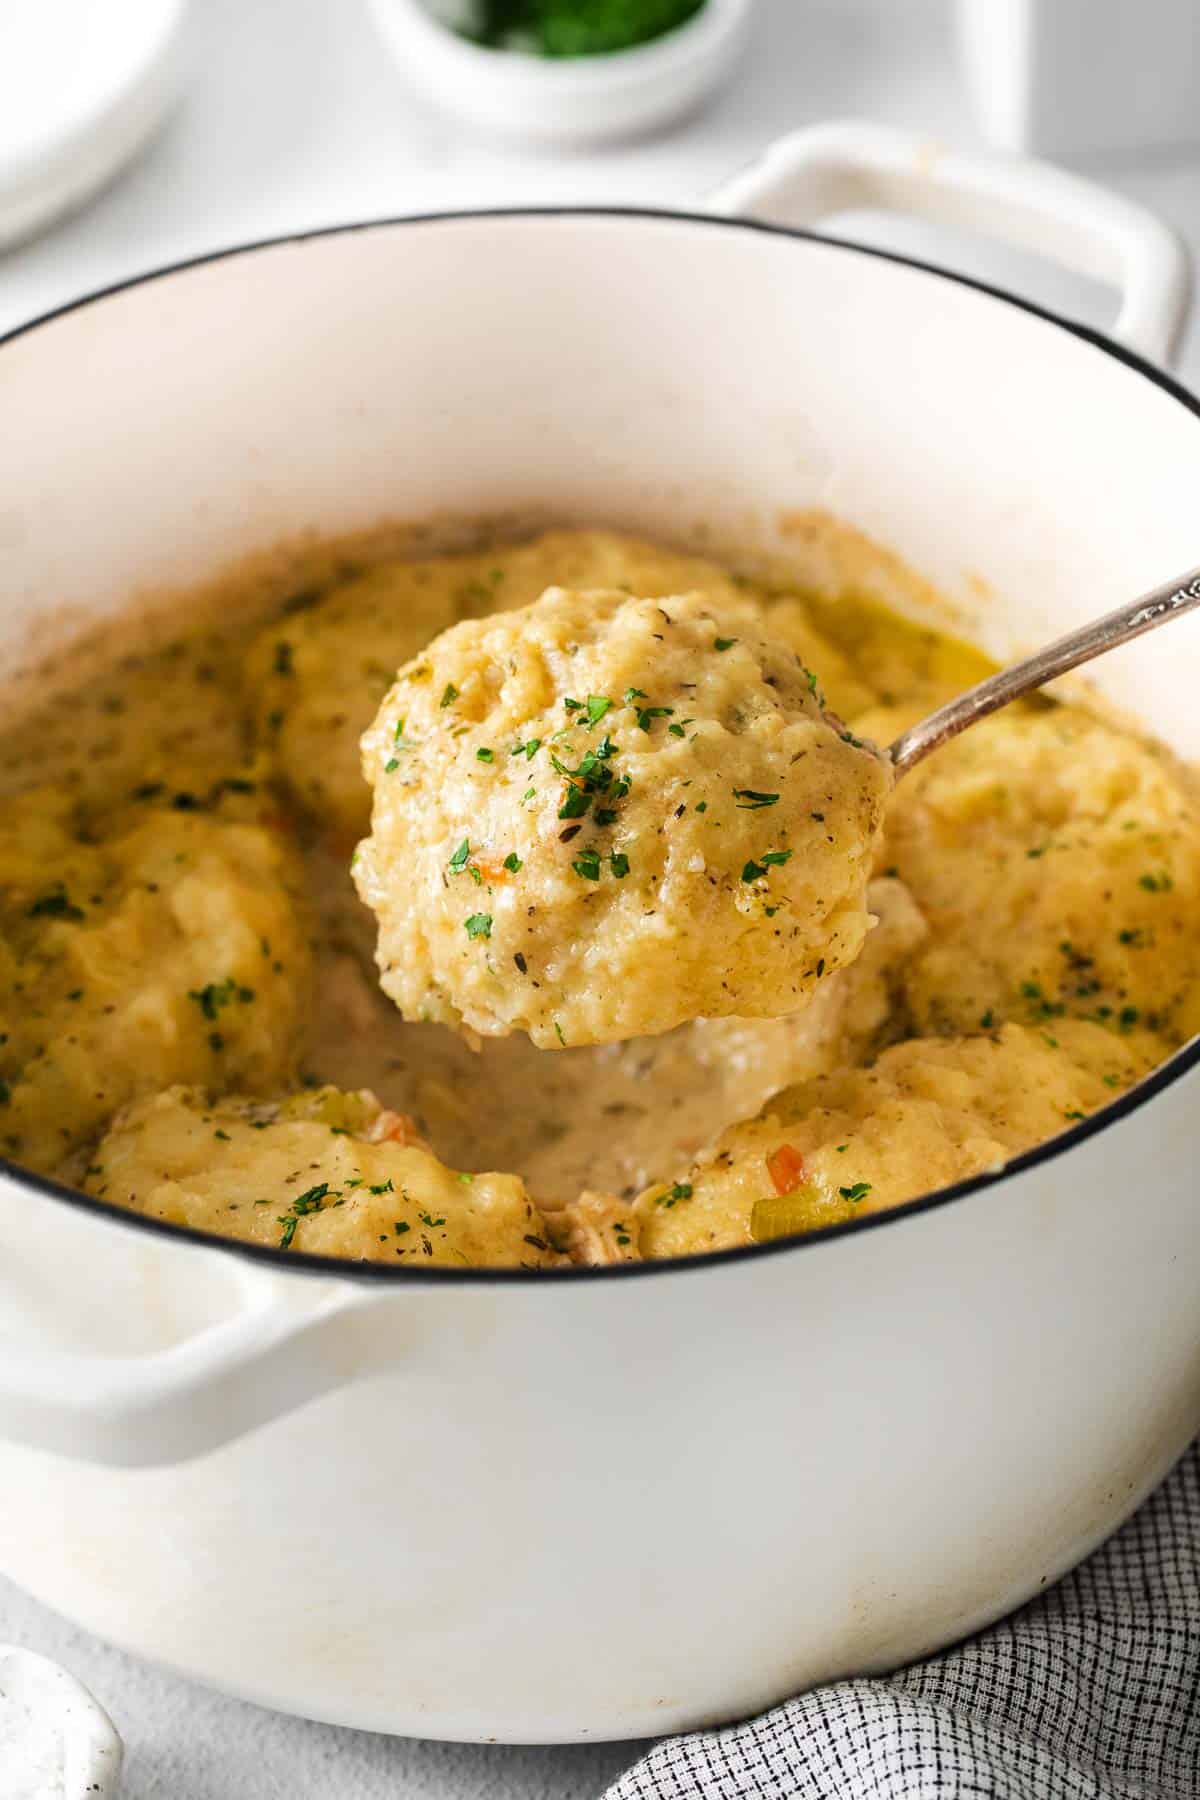 A close-up photo of chicken and dumplings in a baking dish with a spoon scooping out a serving